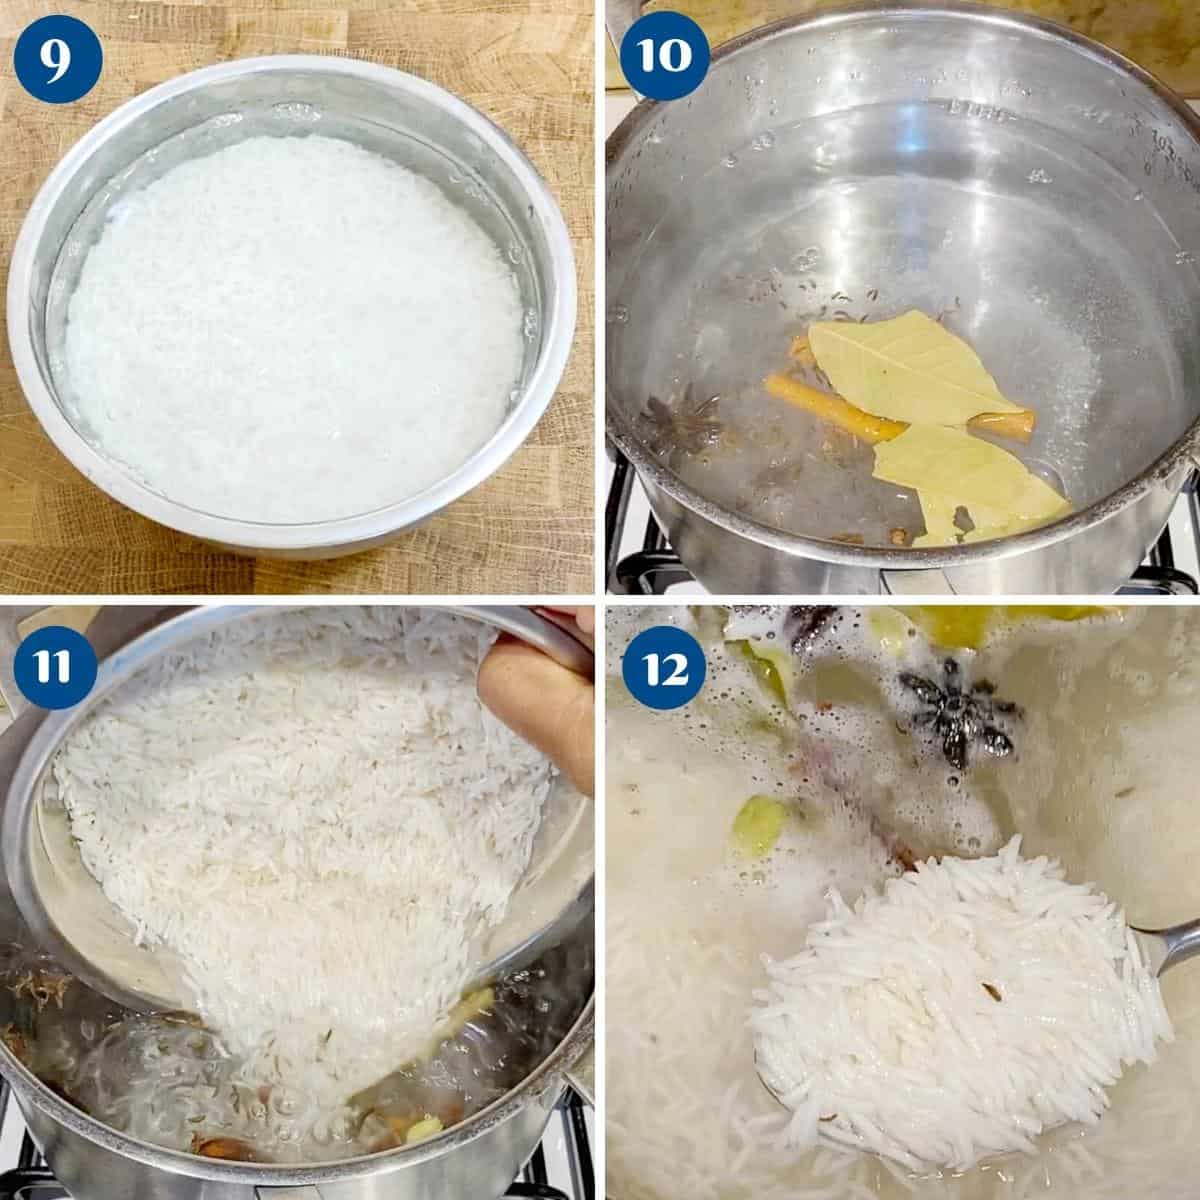 Progress pictures partially cooking rice for biryani.